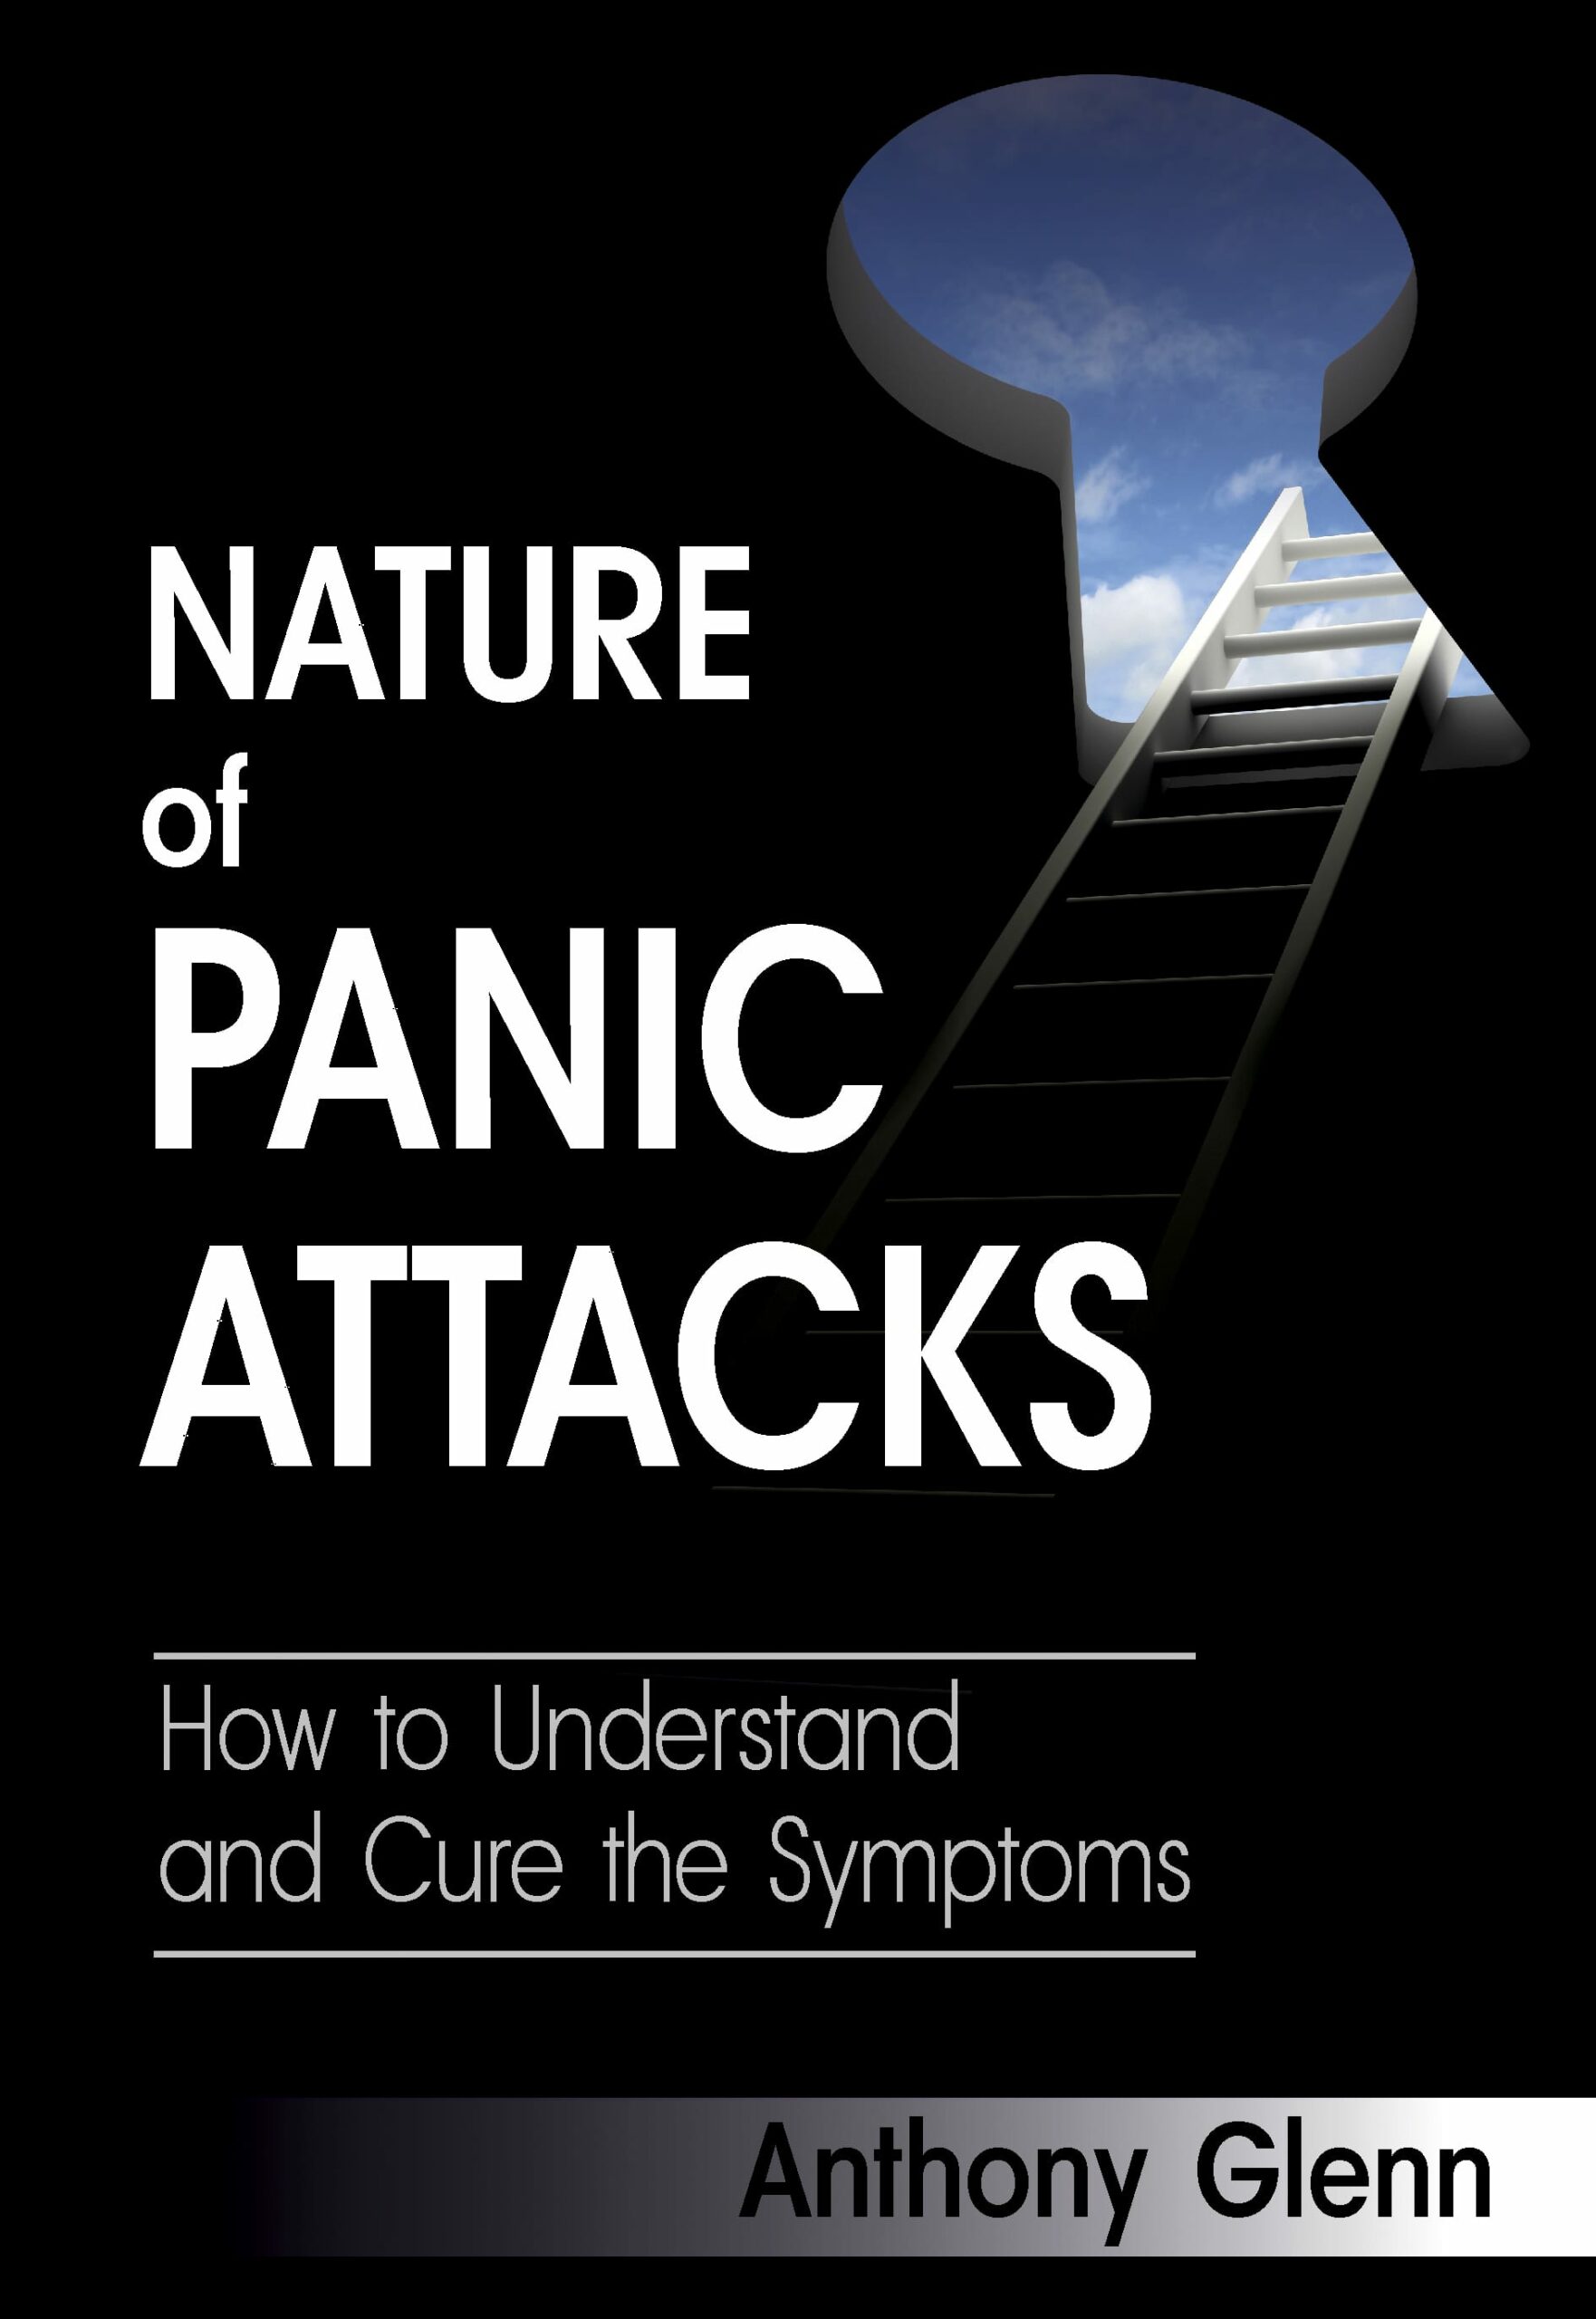 FREE: Nature of Panic Attacks: How to Understand and Cure the Symptoms by Anthony Glenn